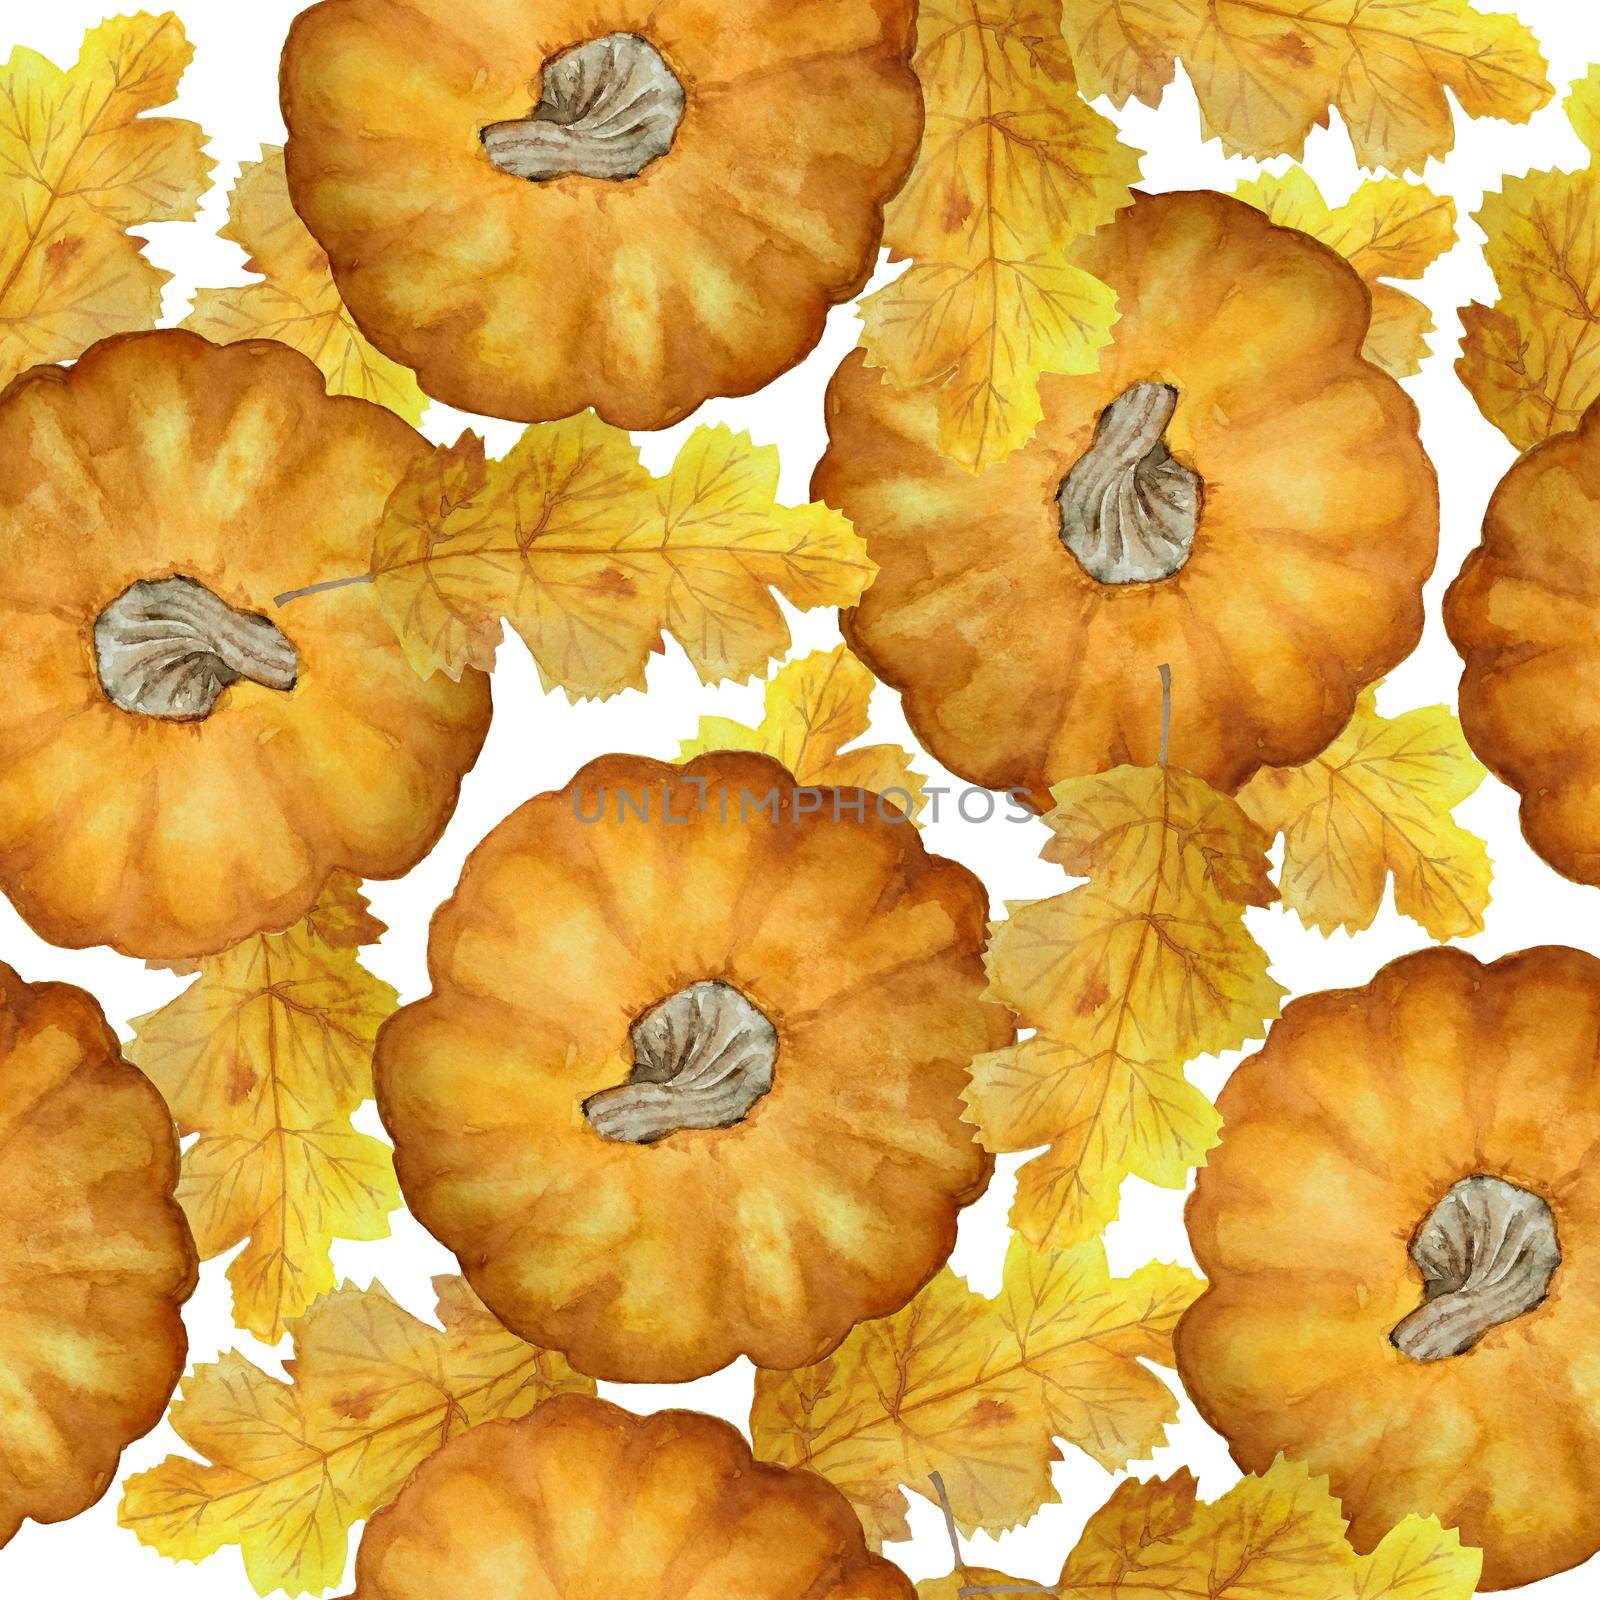 Watercolor hand drawn seamless pattern orange pumpkin, october fall autumn leaves leaf. Forest wood farm harvest concept. Thanksgiving halloween clebration warm decoration design textile posters